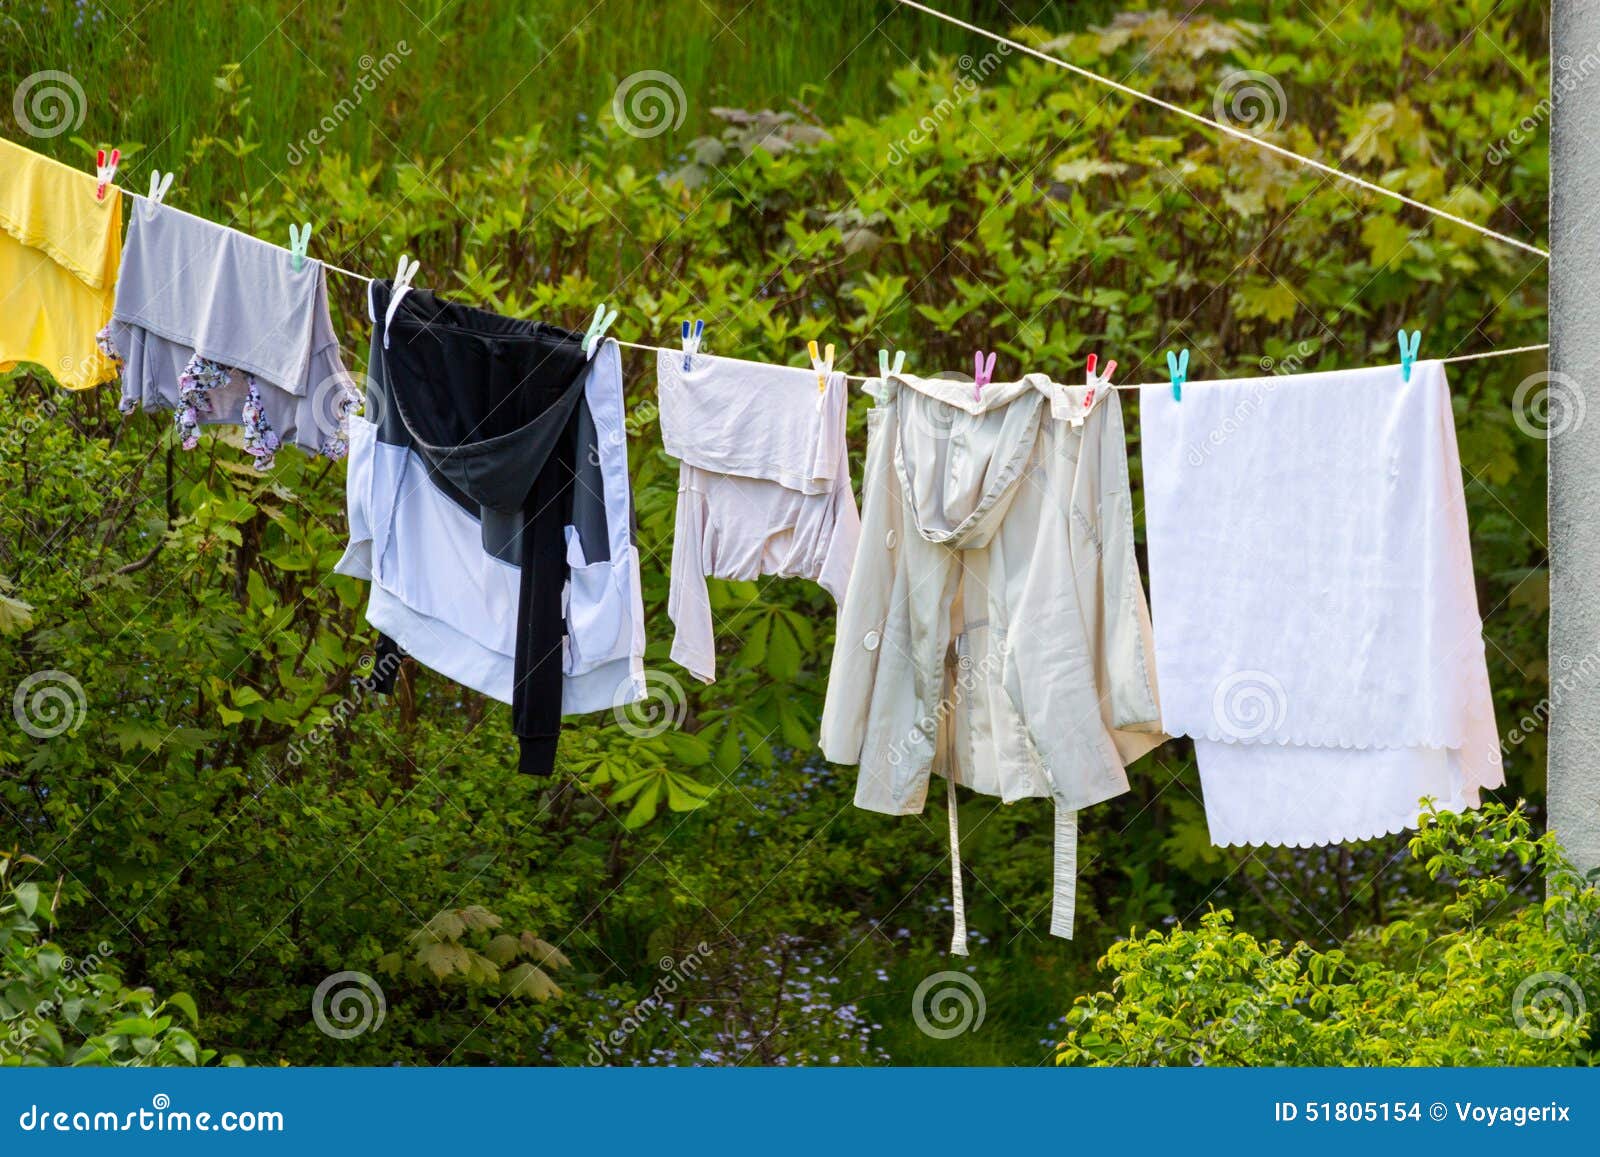 Clean Laundry Hanging To Dry on Line Outdoor Stock Photo - Image of nature,  clothesline: 51805154